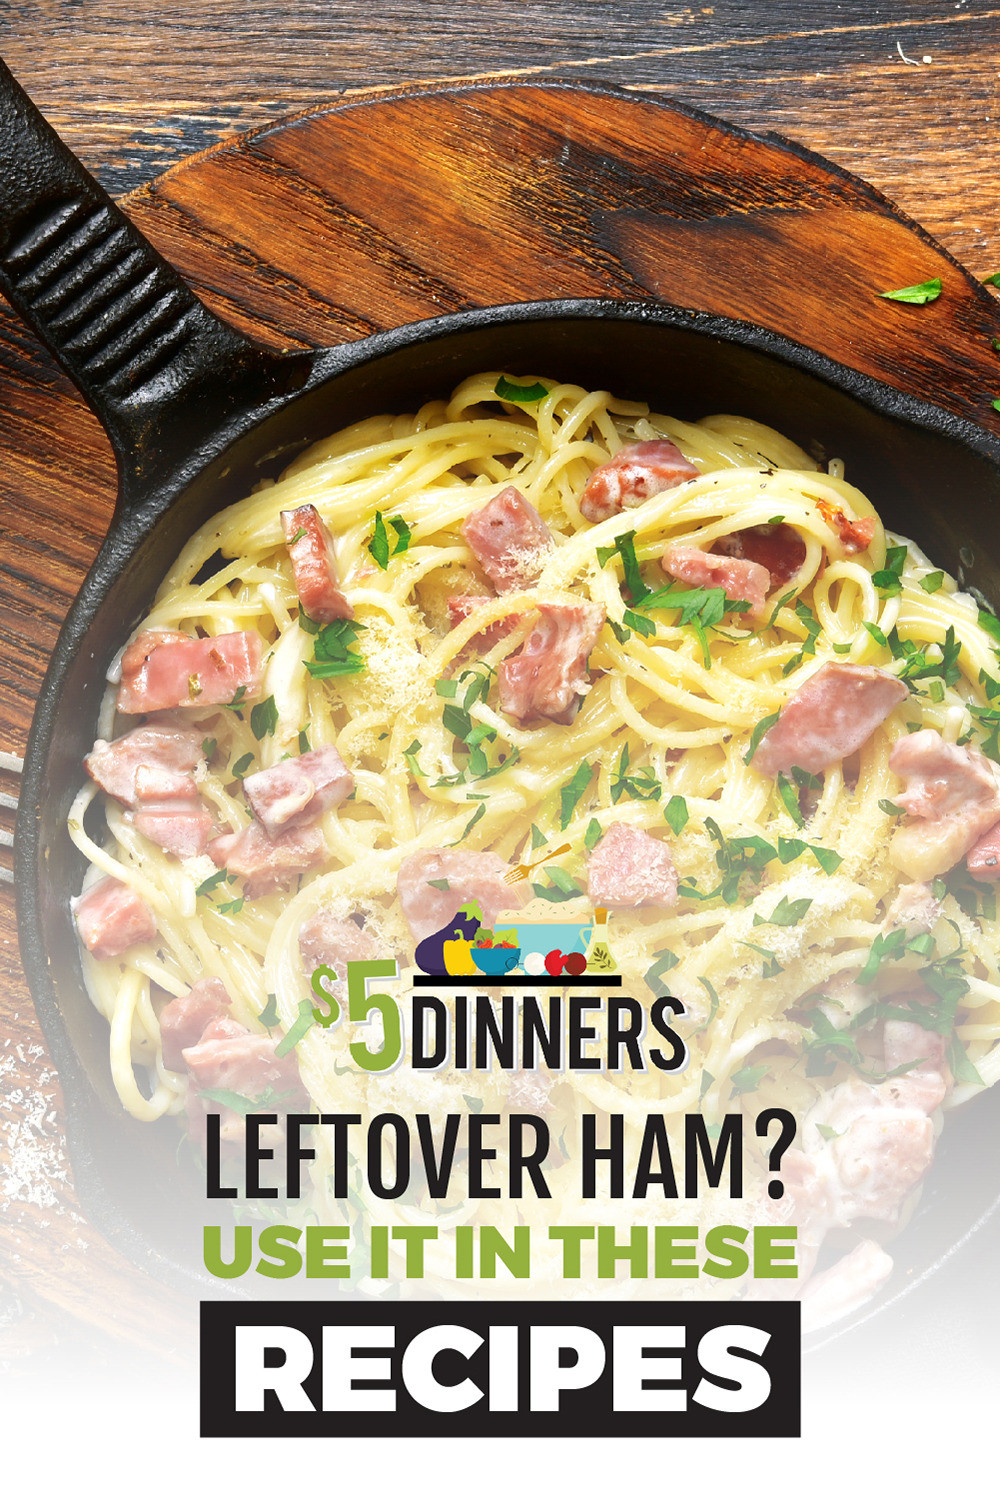 Leftover Easter Ham Recipes
 17 Recipes That Call for Leftover Easter Ham $5 Dinners